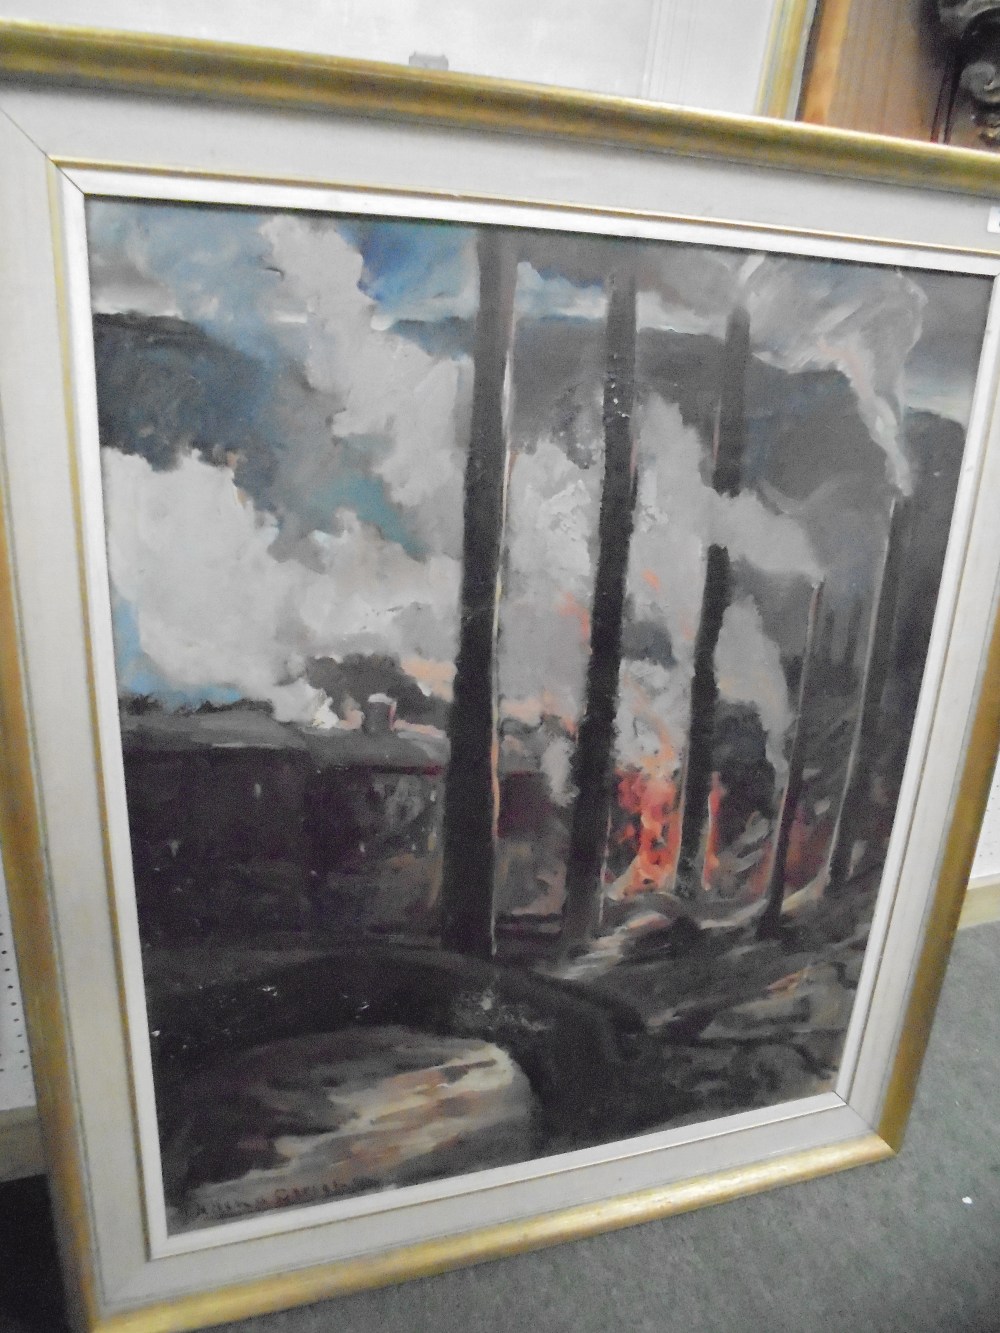 HELENE GLEICHEN, Fires at Night, oil on canvas, signed, 75x63cm - Image 3 of 4